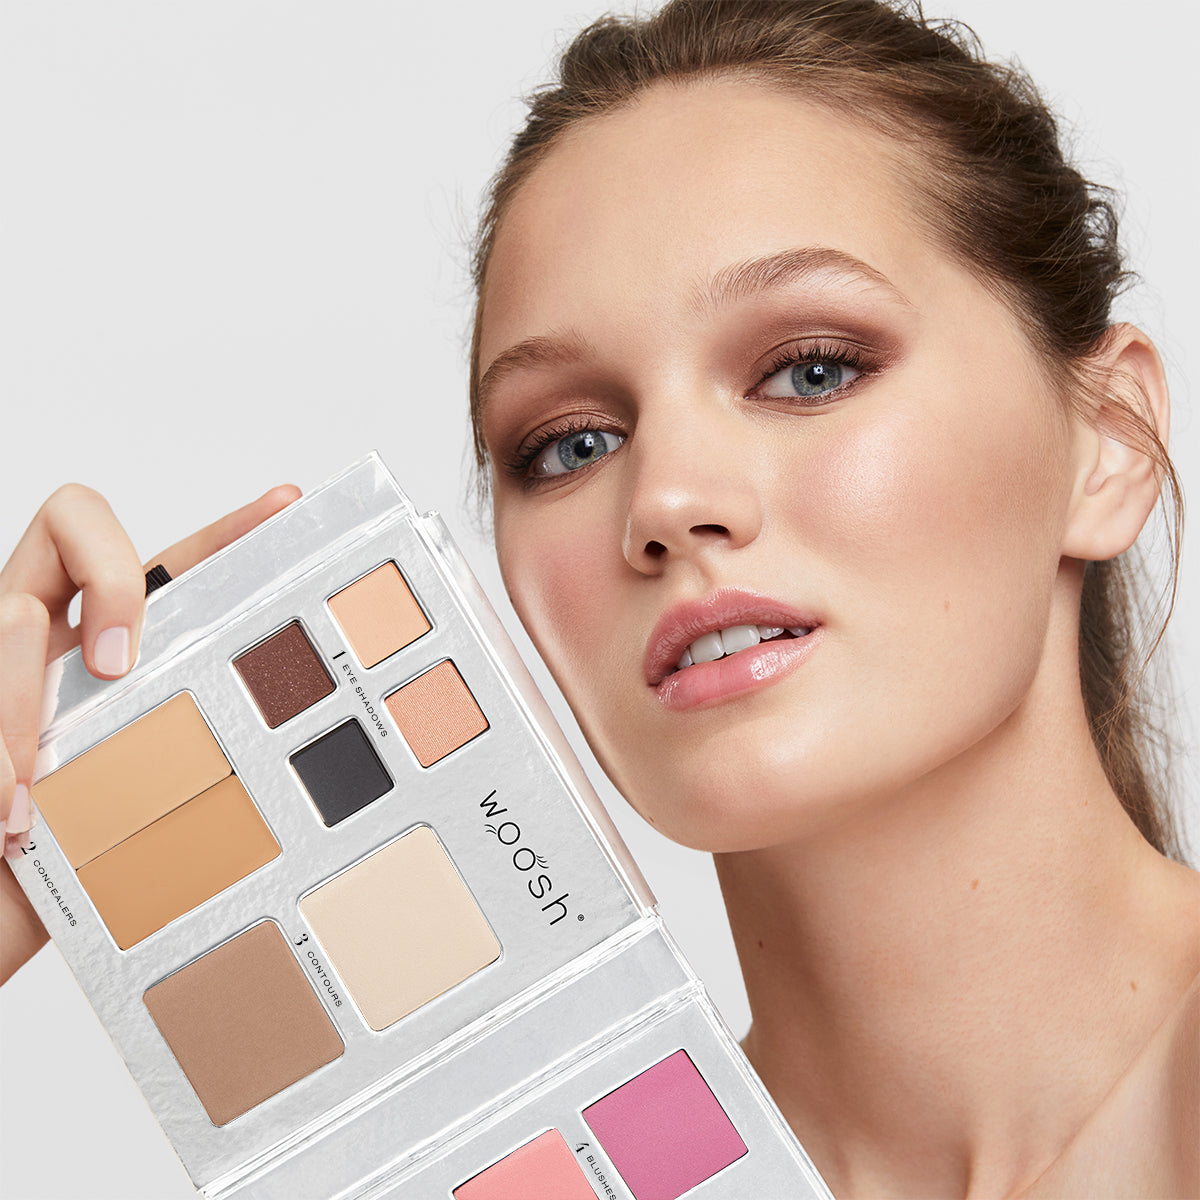 Brunette model holding the 13 pan Fold out Face palette that includes Eyeshadow, cream concealer, contour, blush, highlight, and foundation powders.